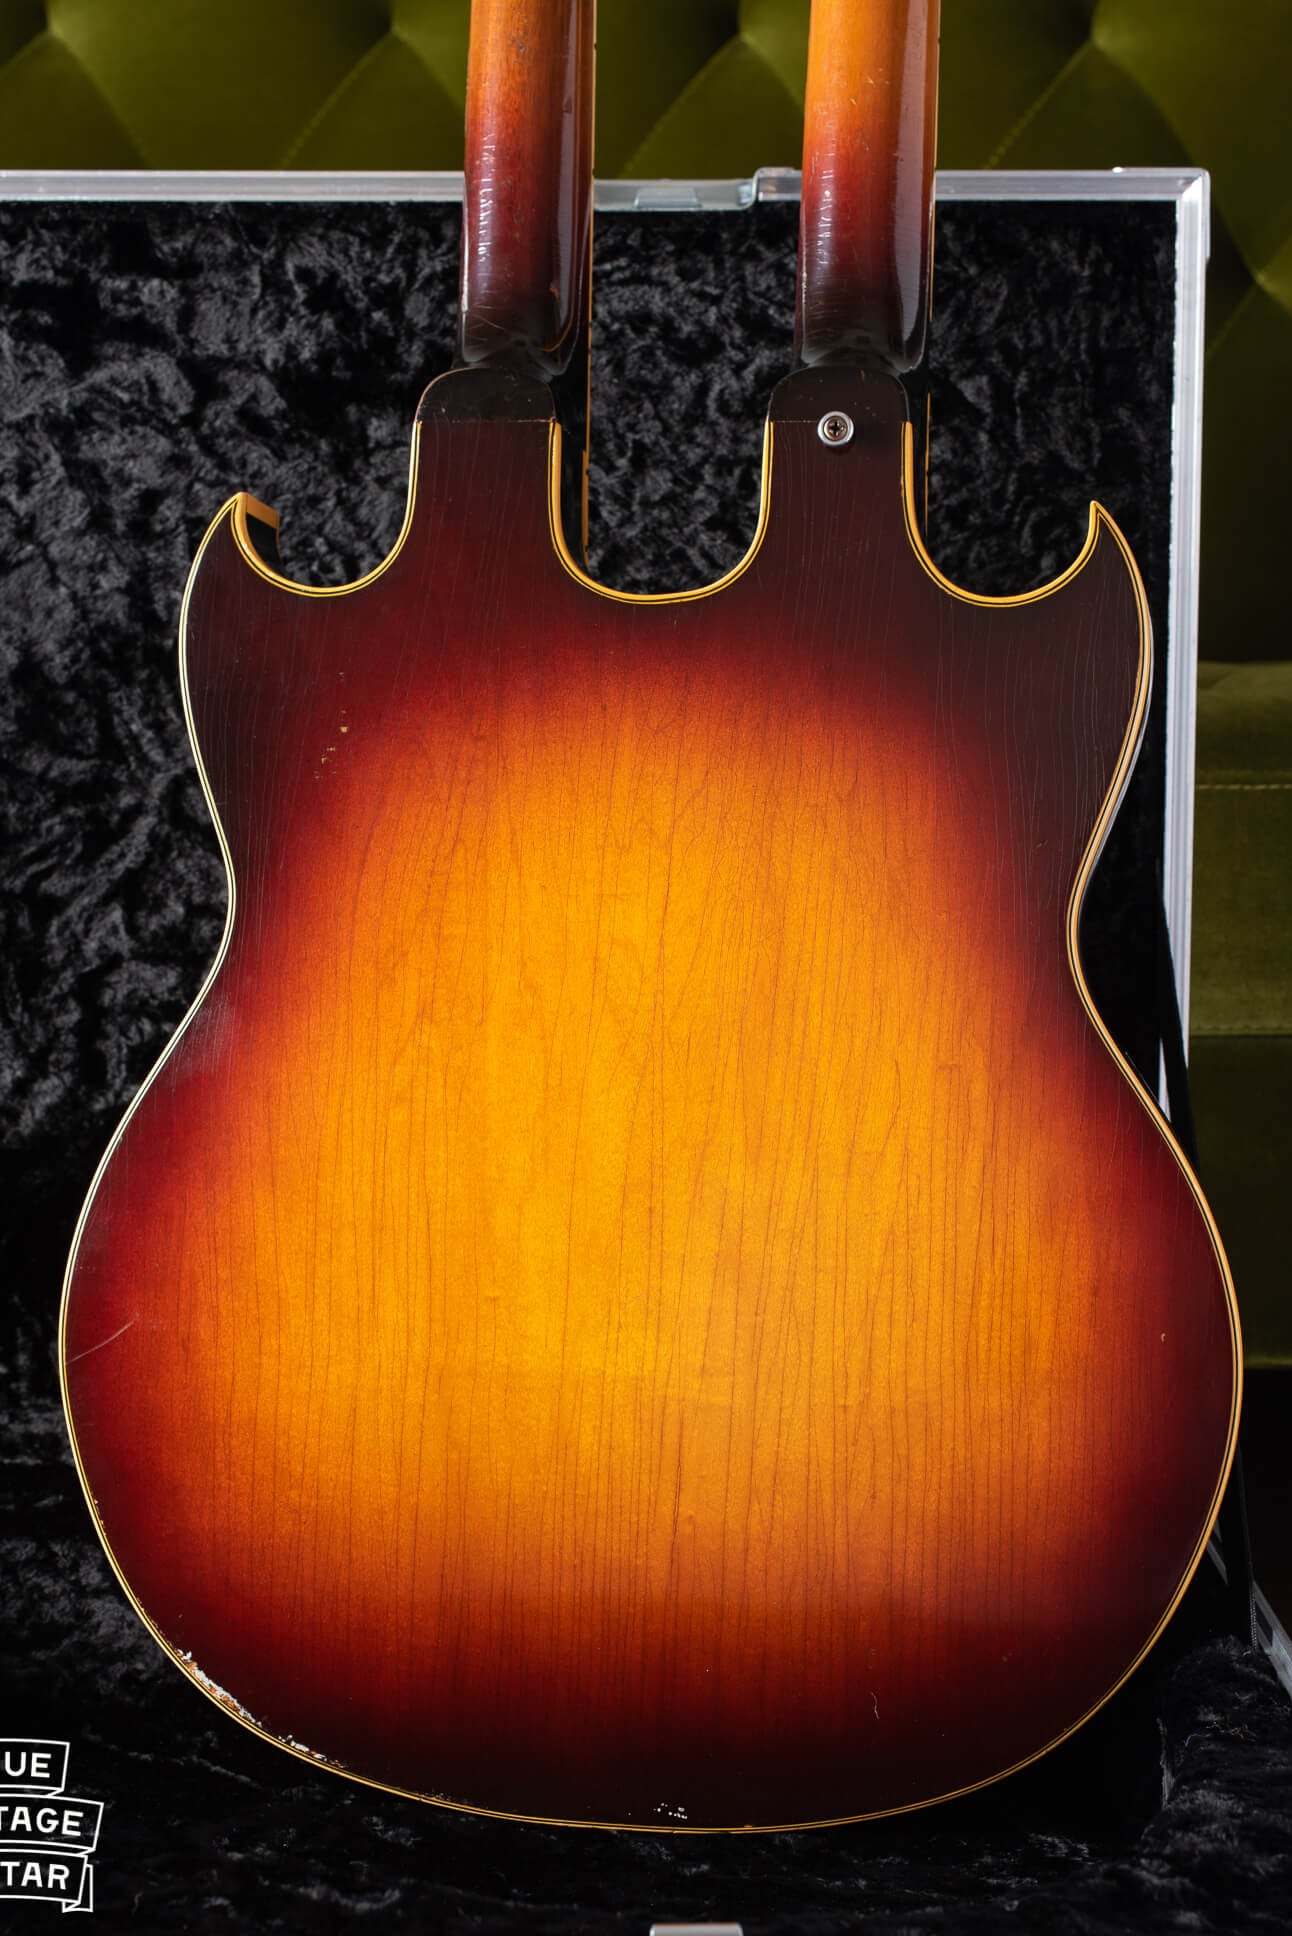 Maple back of 1959 Gibson EDS-1275 spruce top double neck guitar